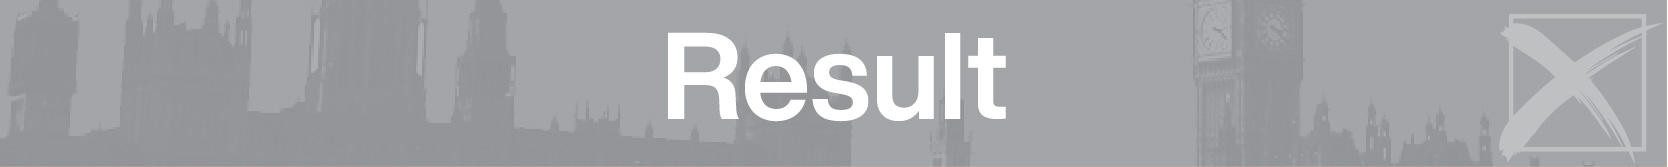 Banner graphic announcing a "Result" in white writing against a grey background with a faded image of the Houses of Parliament.